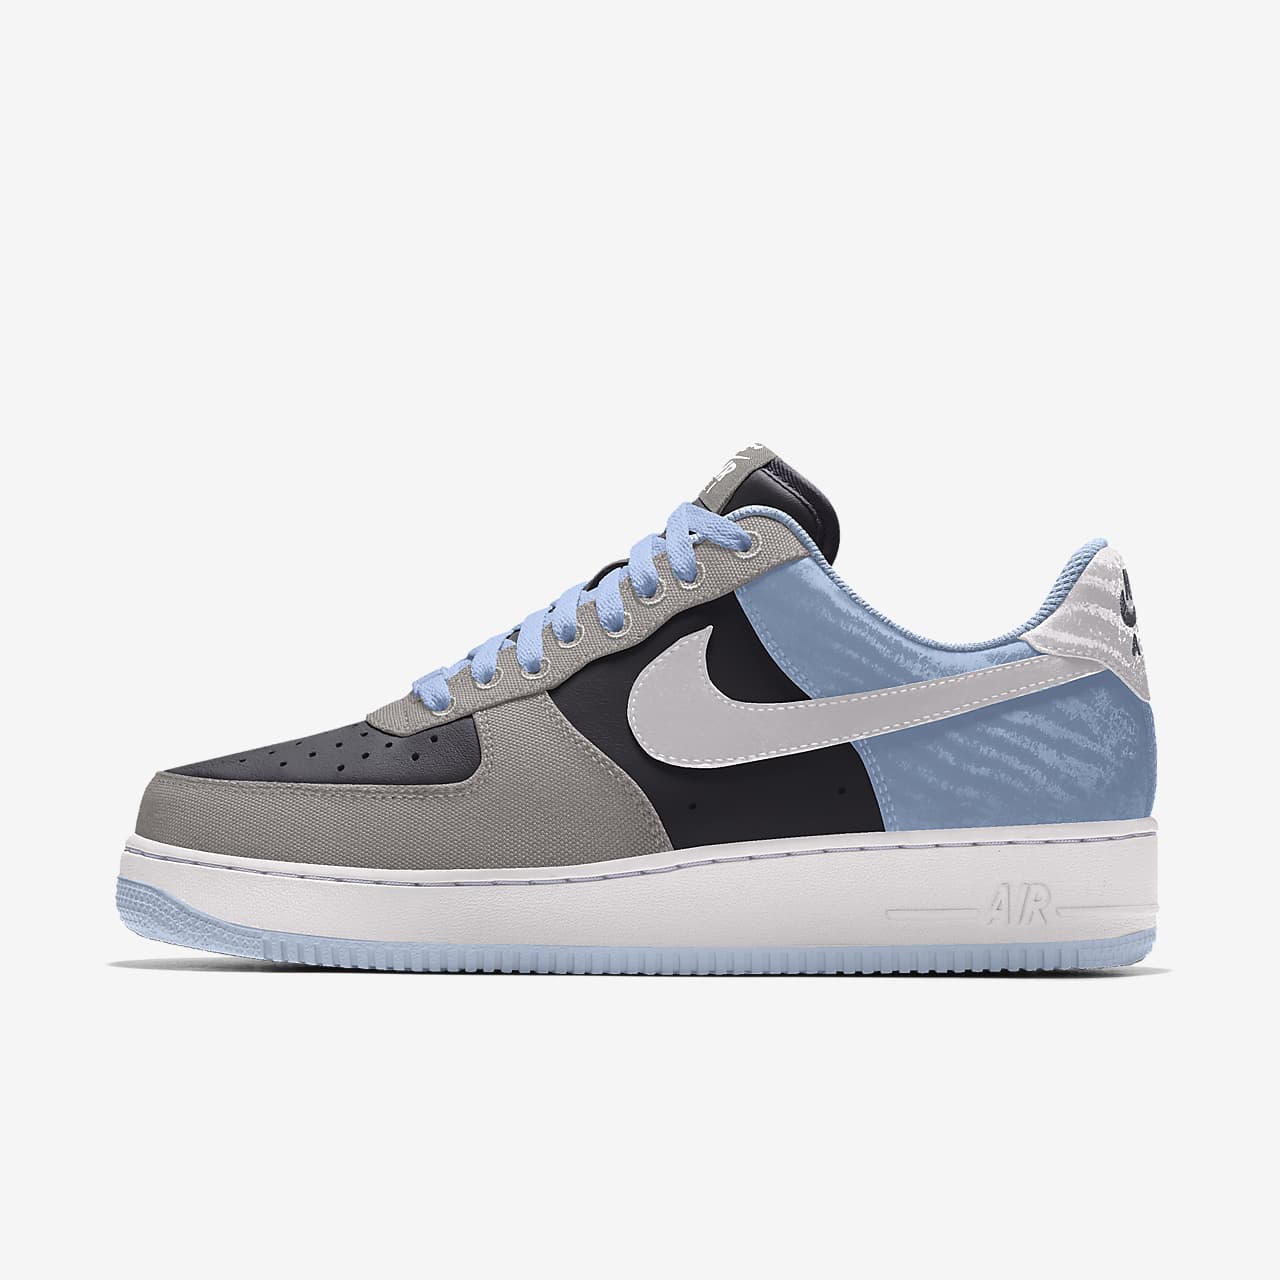 Nike Air Force 1 低筒 By You 專屬訂製男鞋